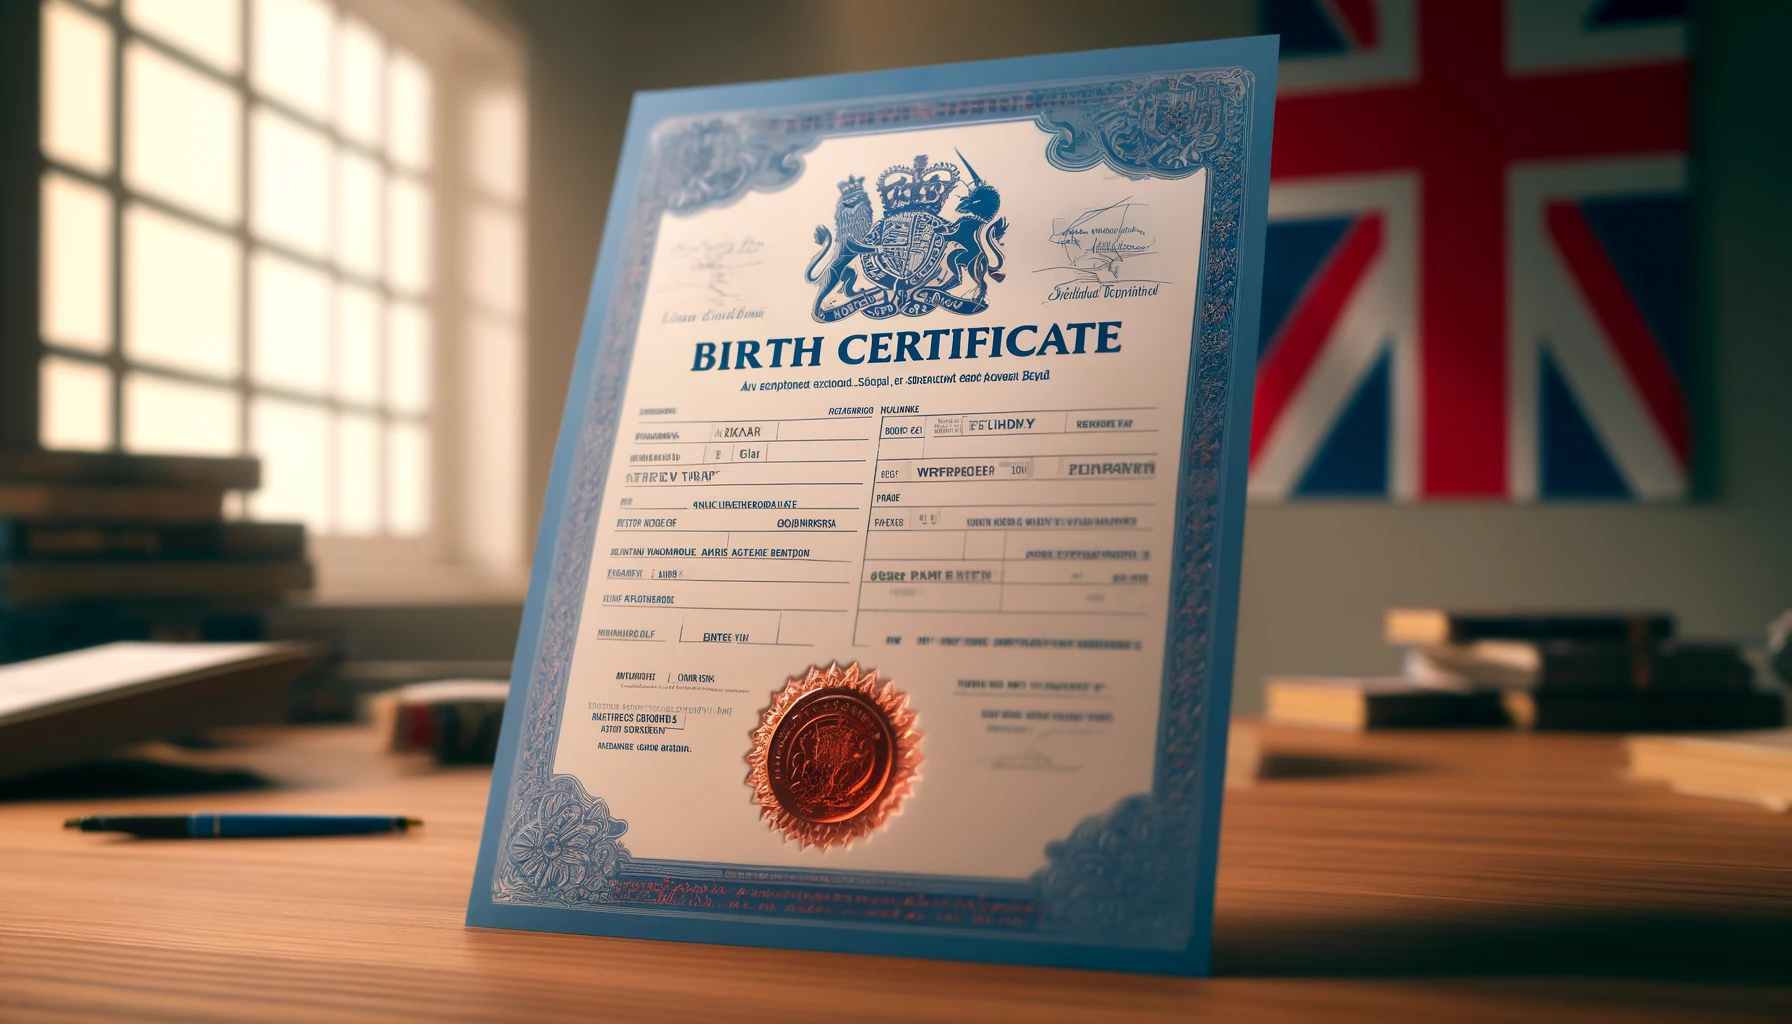 Process of Obtaining a Replacement Birth Certificate in the UK